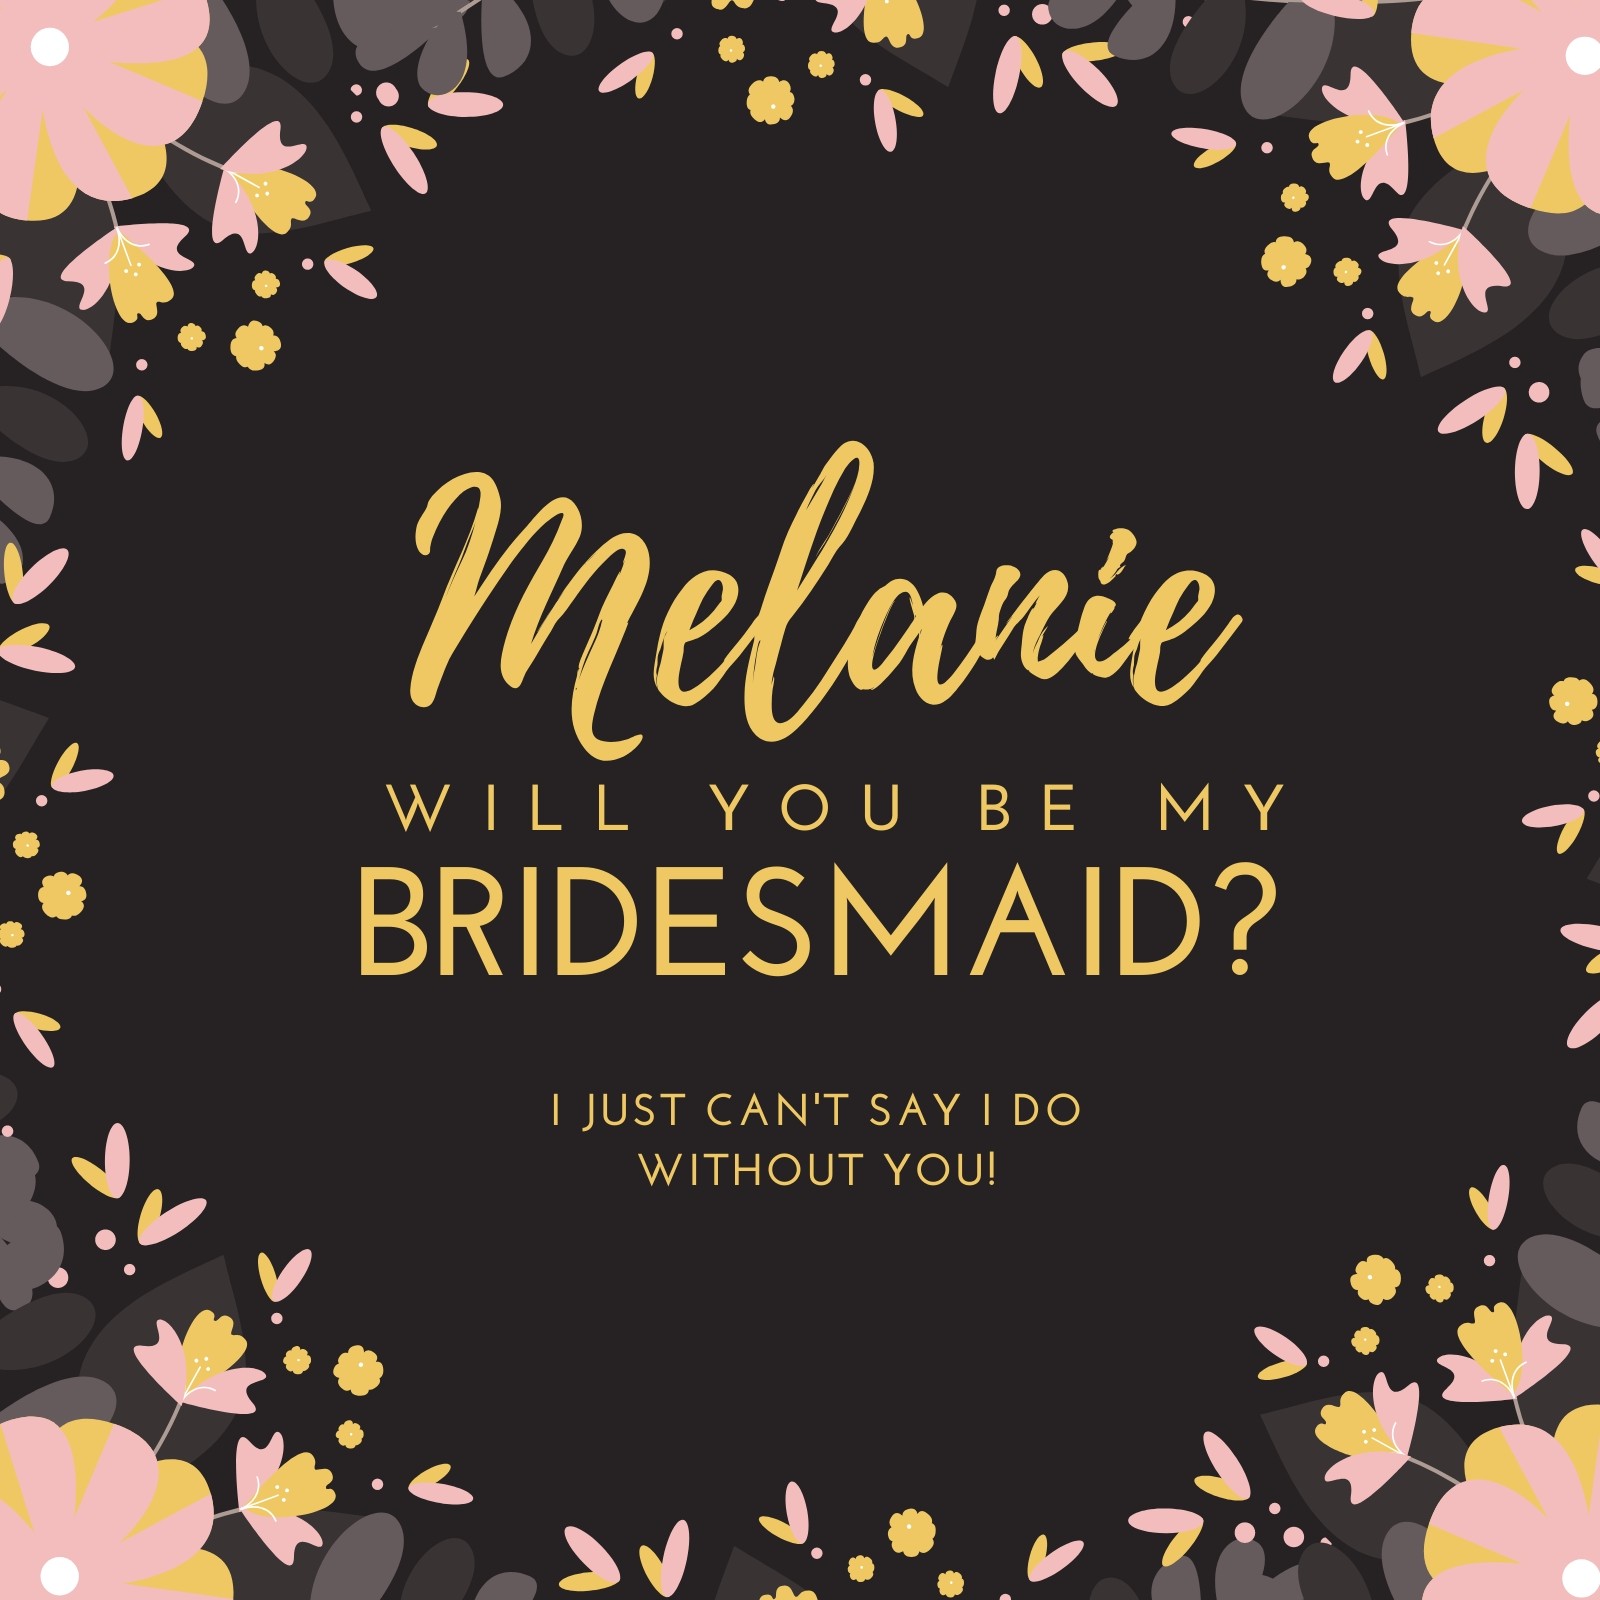 Customize 16+ Be My Bridesmaid Invitations Templates Online Canva